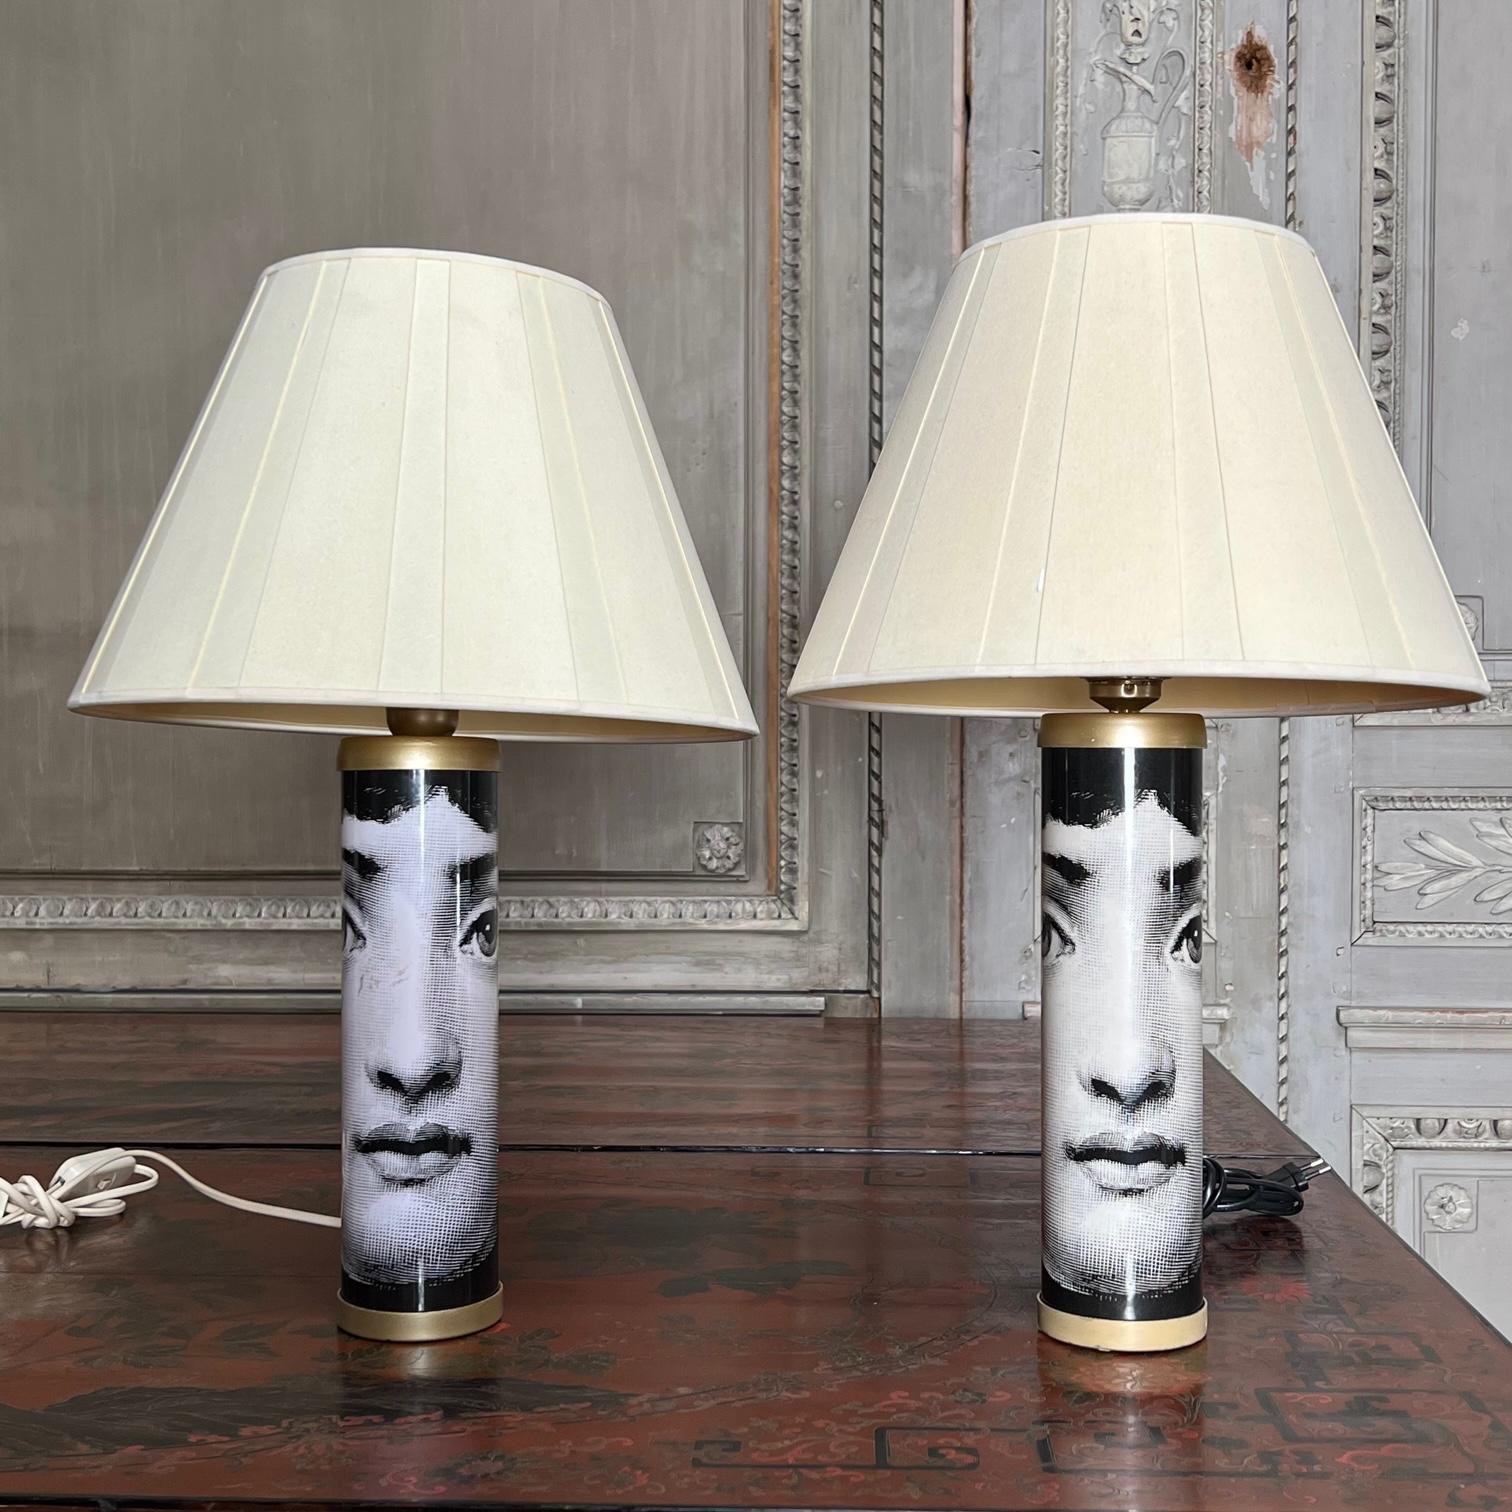 Pair of table lamps model designed by Pierro Fornasetti featuring the image of famed opera singer Lina Cavalieri screen printed around the base. Fornasetti label on base. These lamps will need to be wired, it currently has old European wiring that